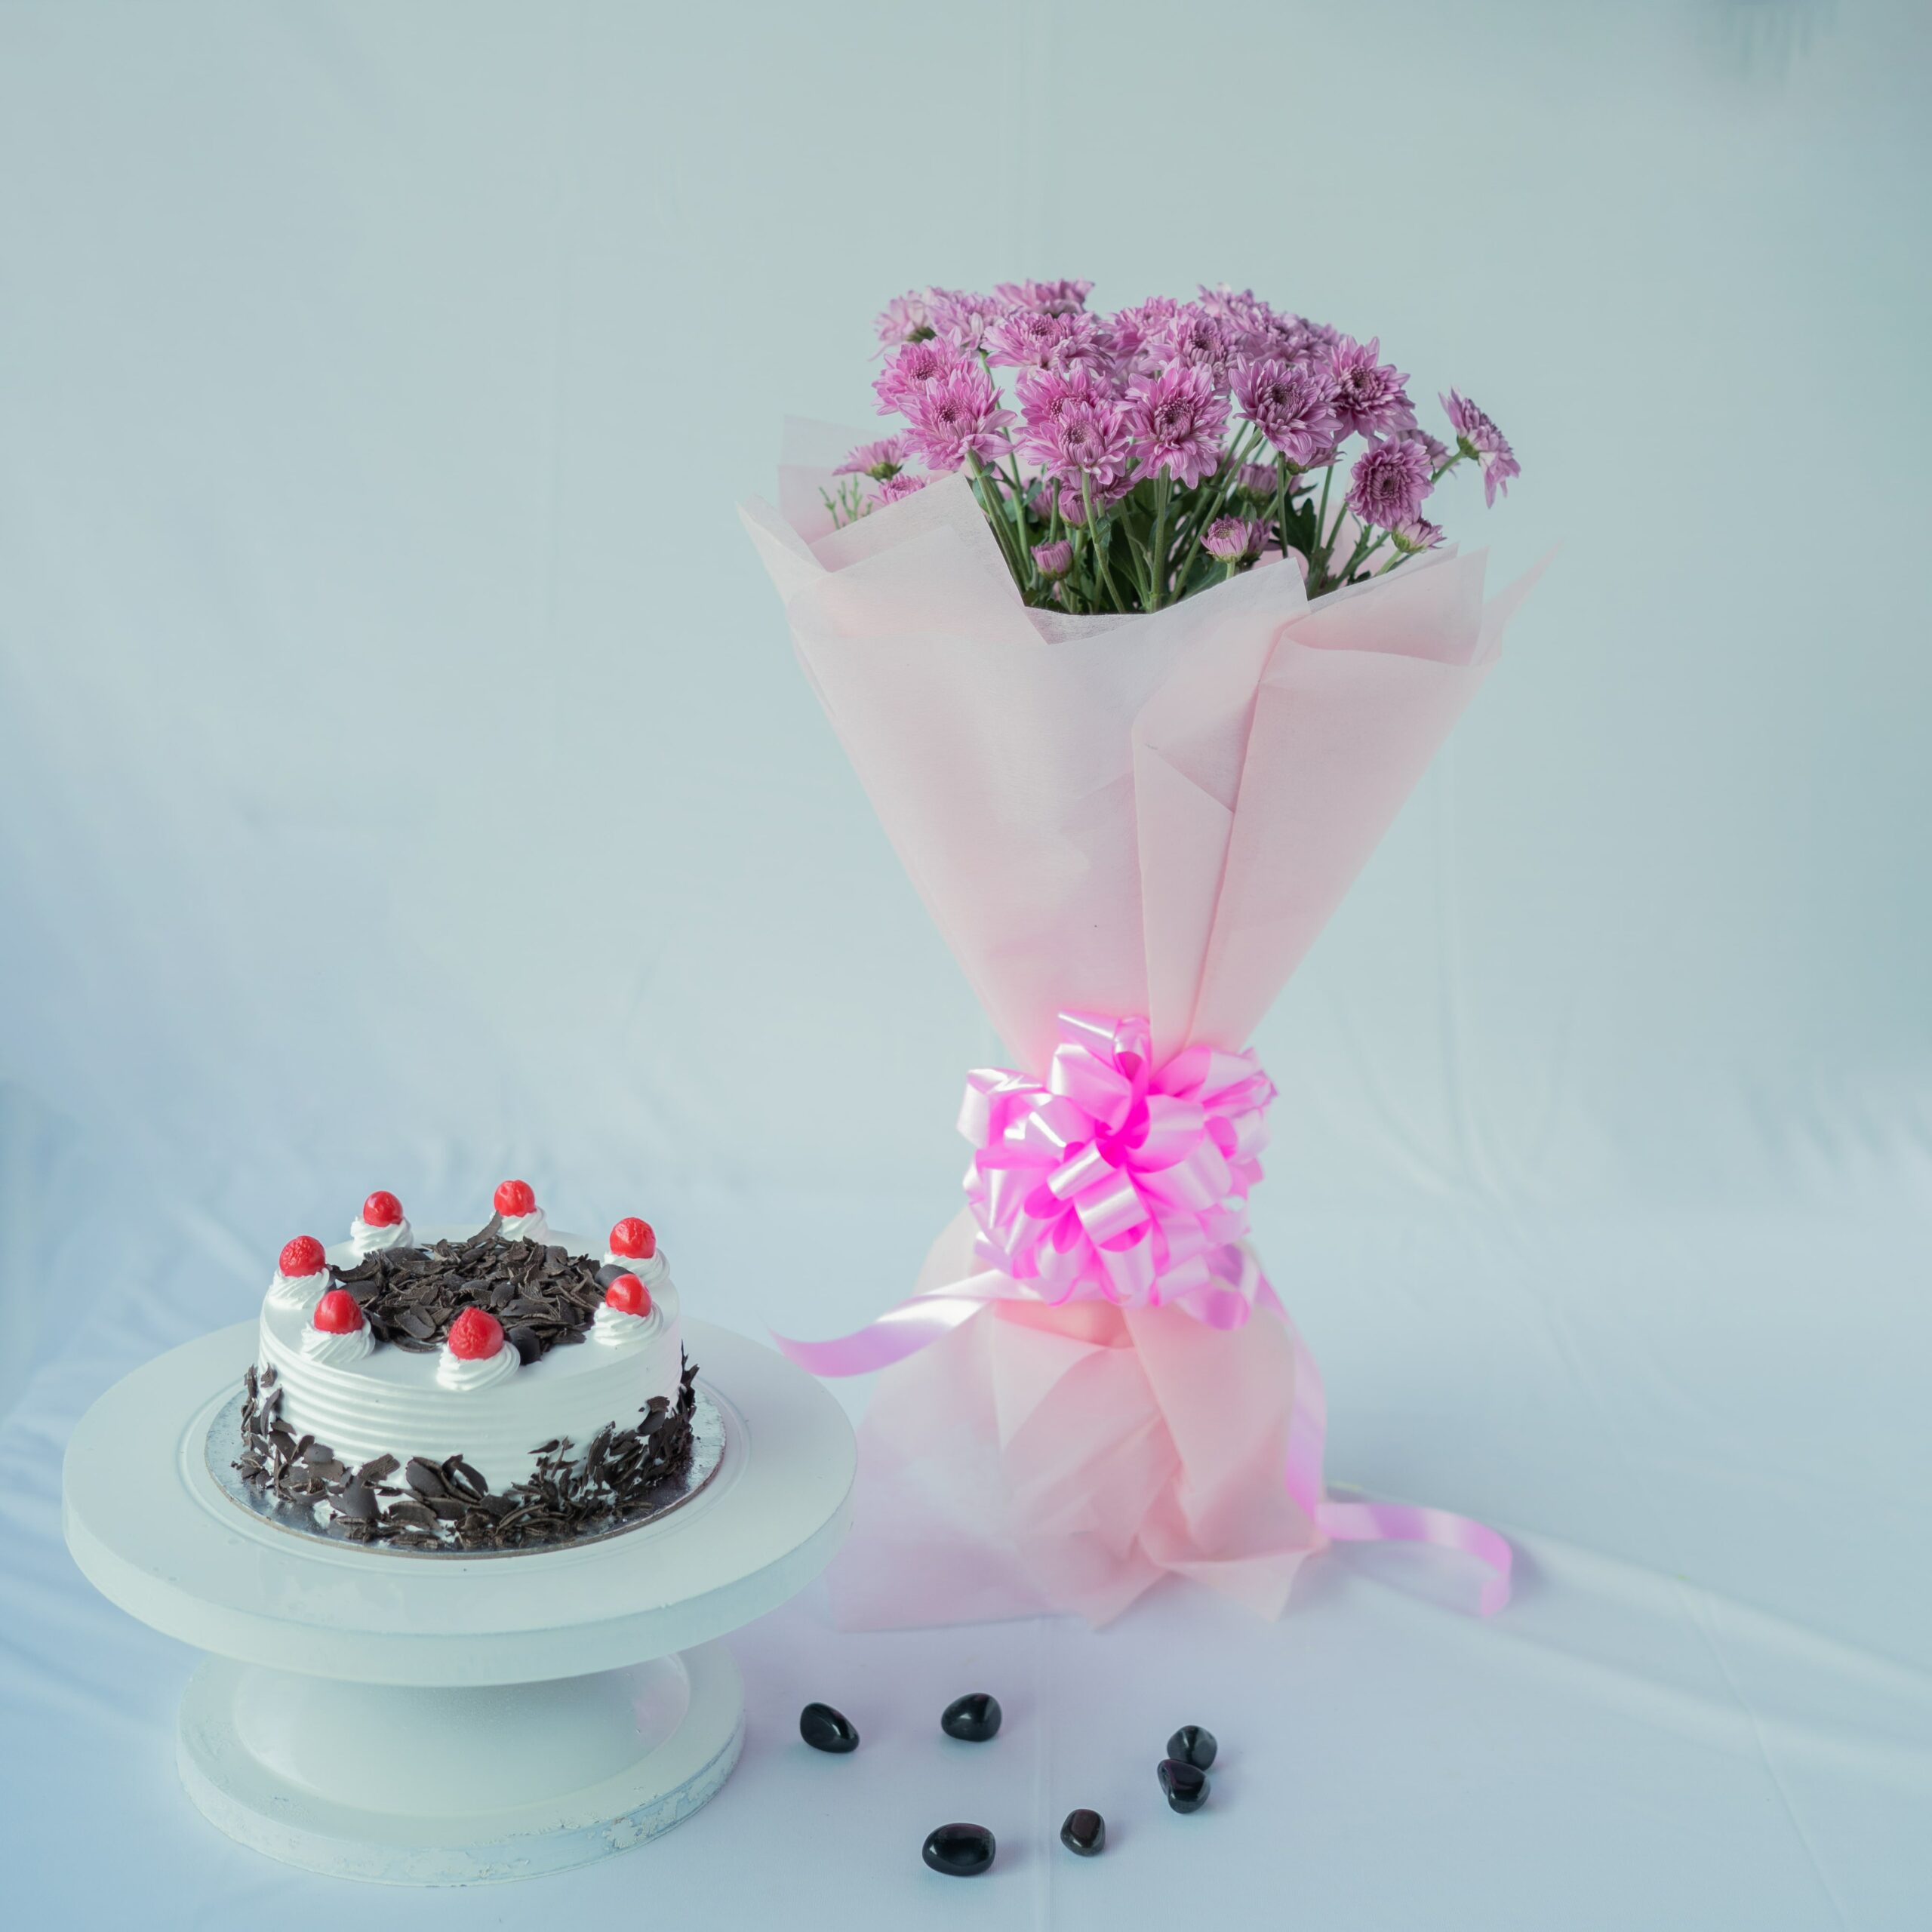 Send Cake and Flowers Online Delivery in India, 50% OFF | Happy birthday  cakes, Cake, Gift cake